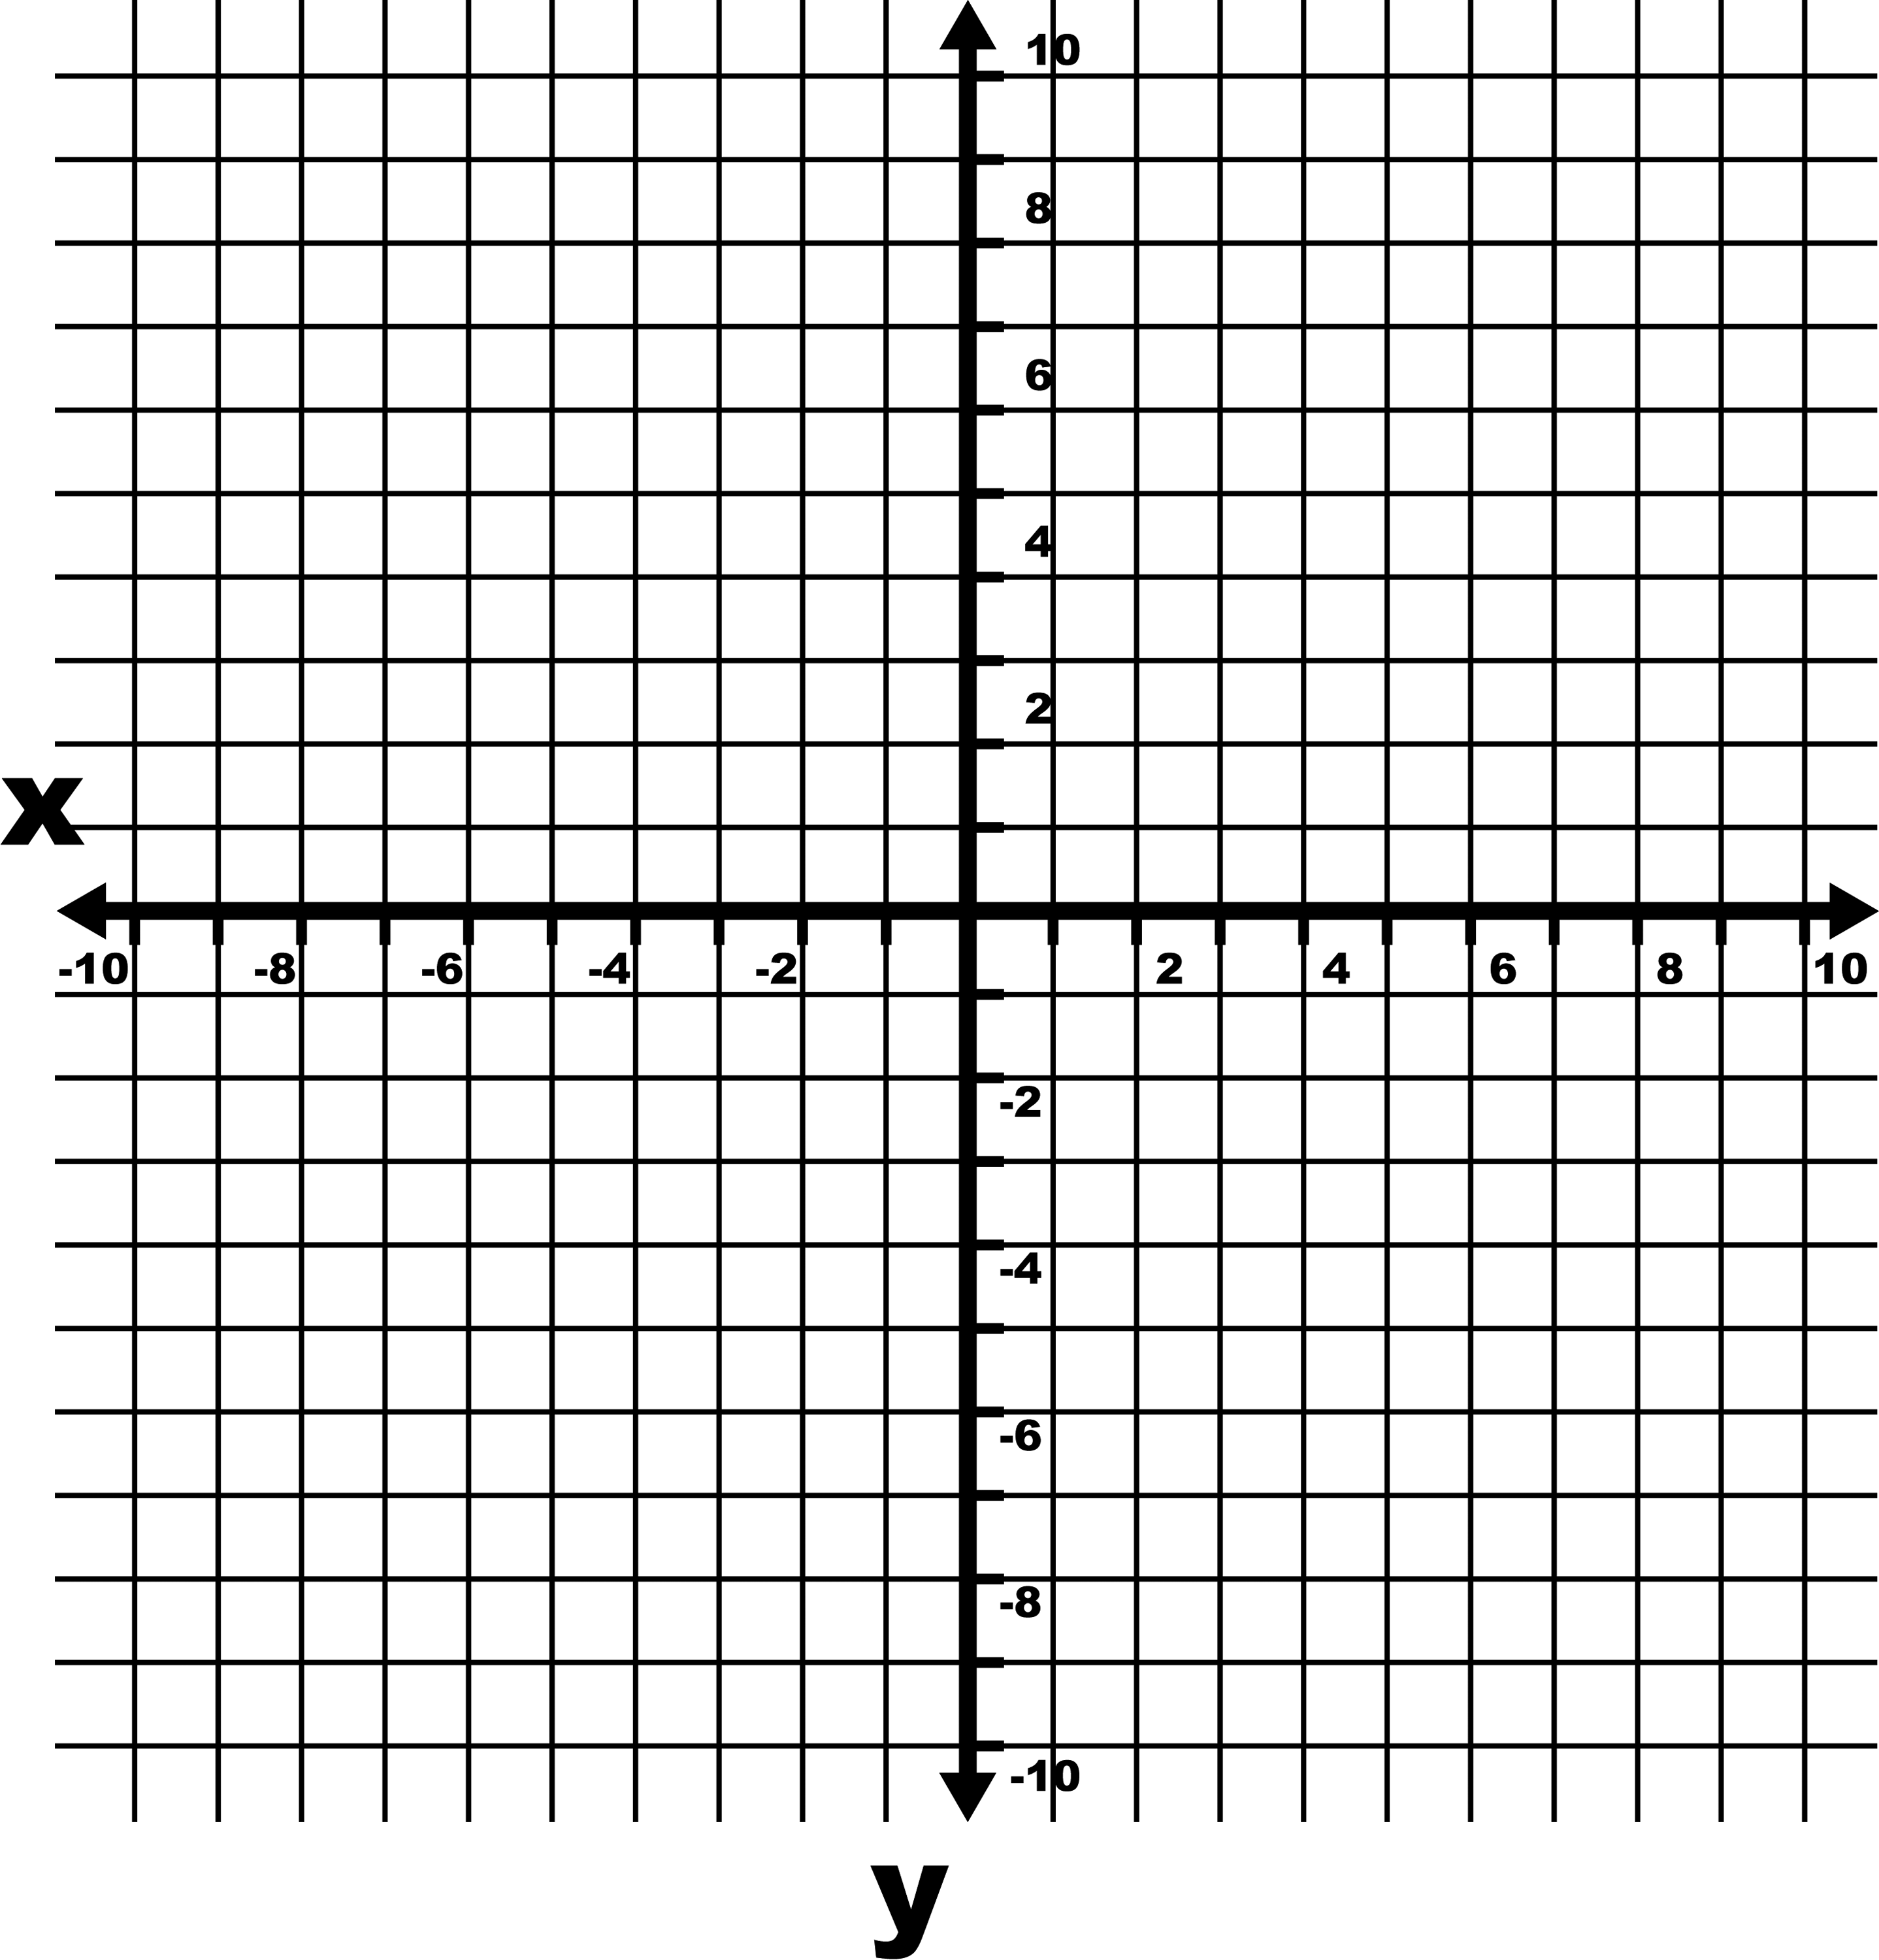 -10 To 10 Coordinate Grid With Axes And Even Increments Labeled And